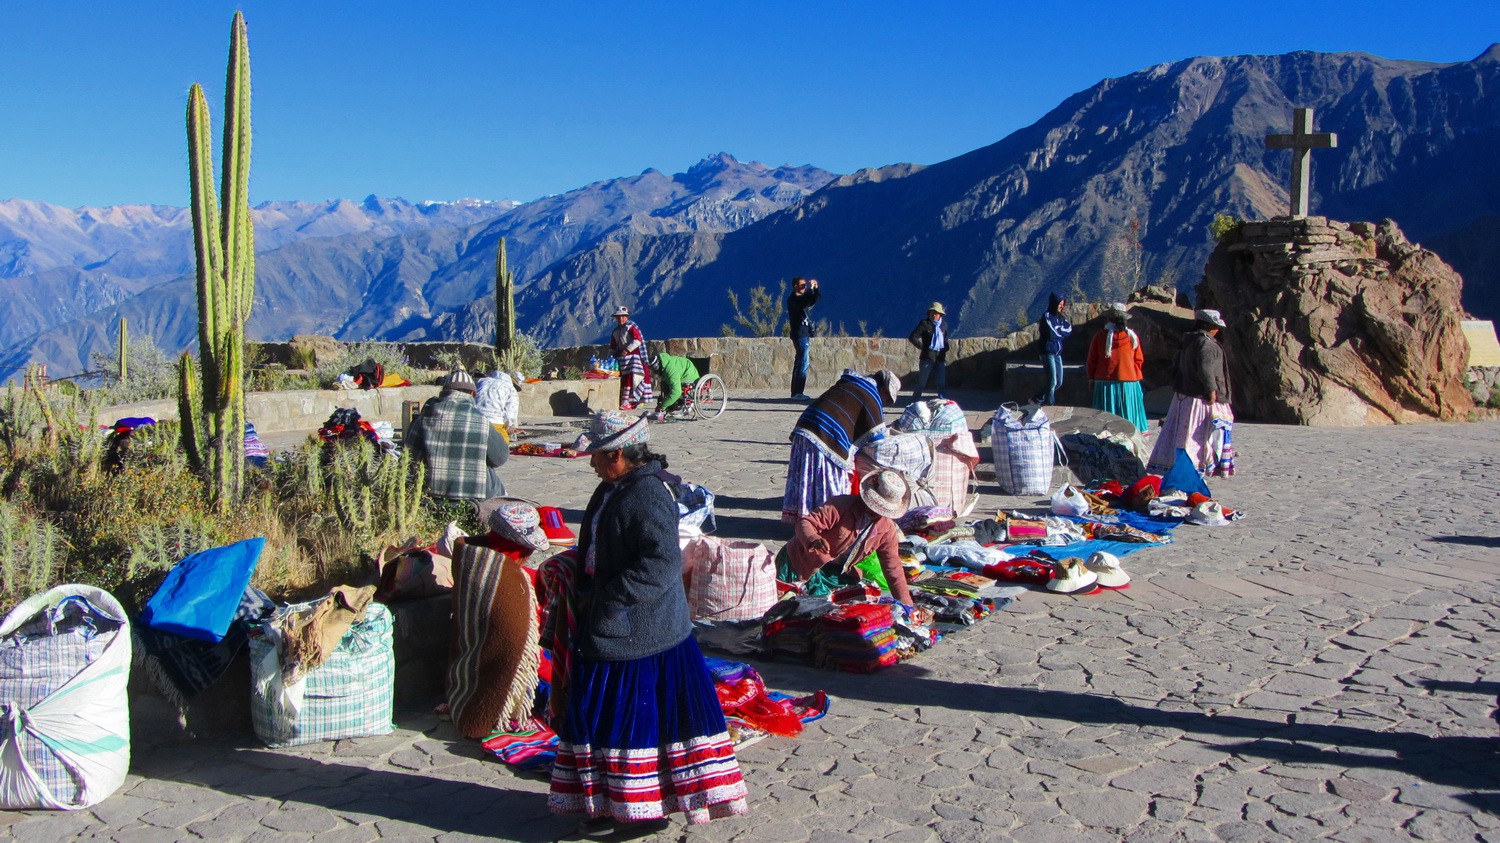 Waiting for business at the viewpoint Cruz del Condor